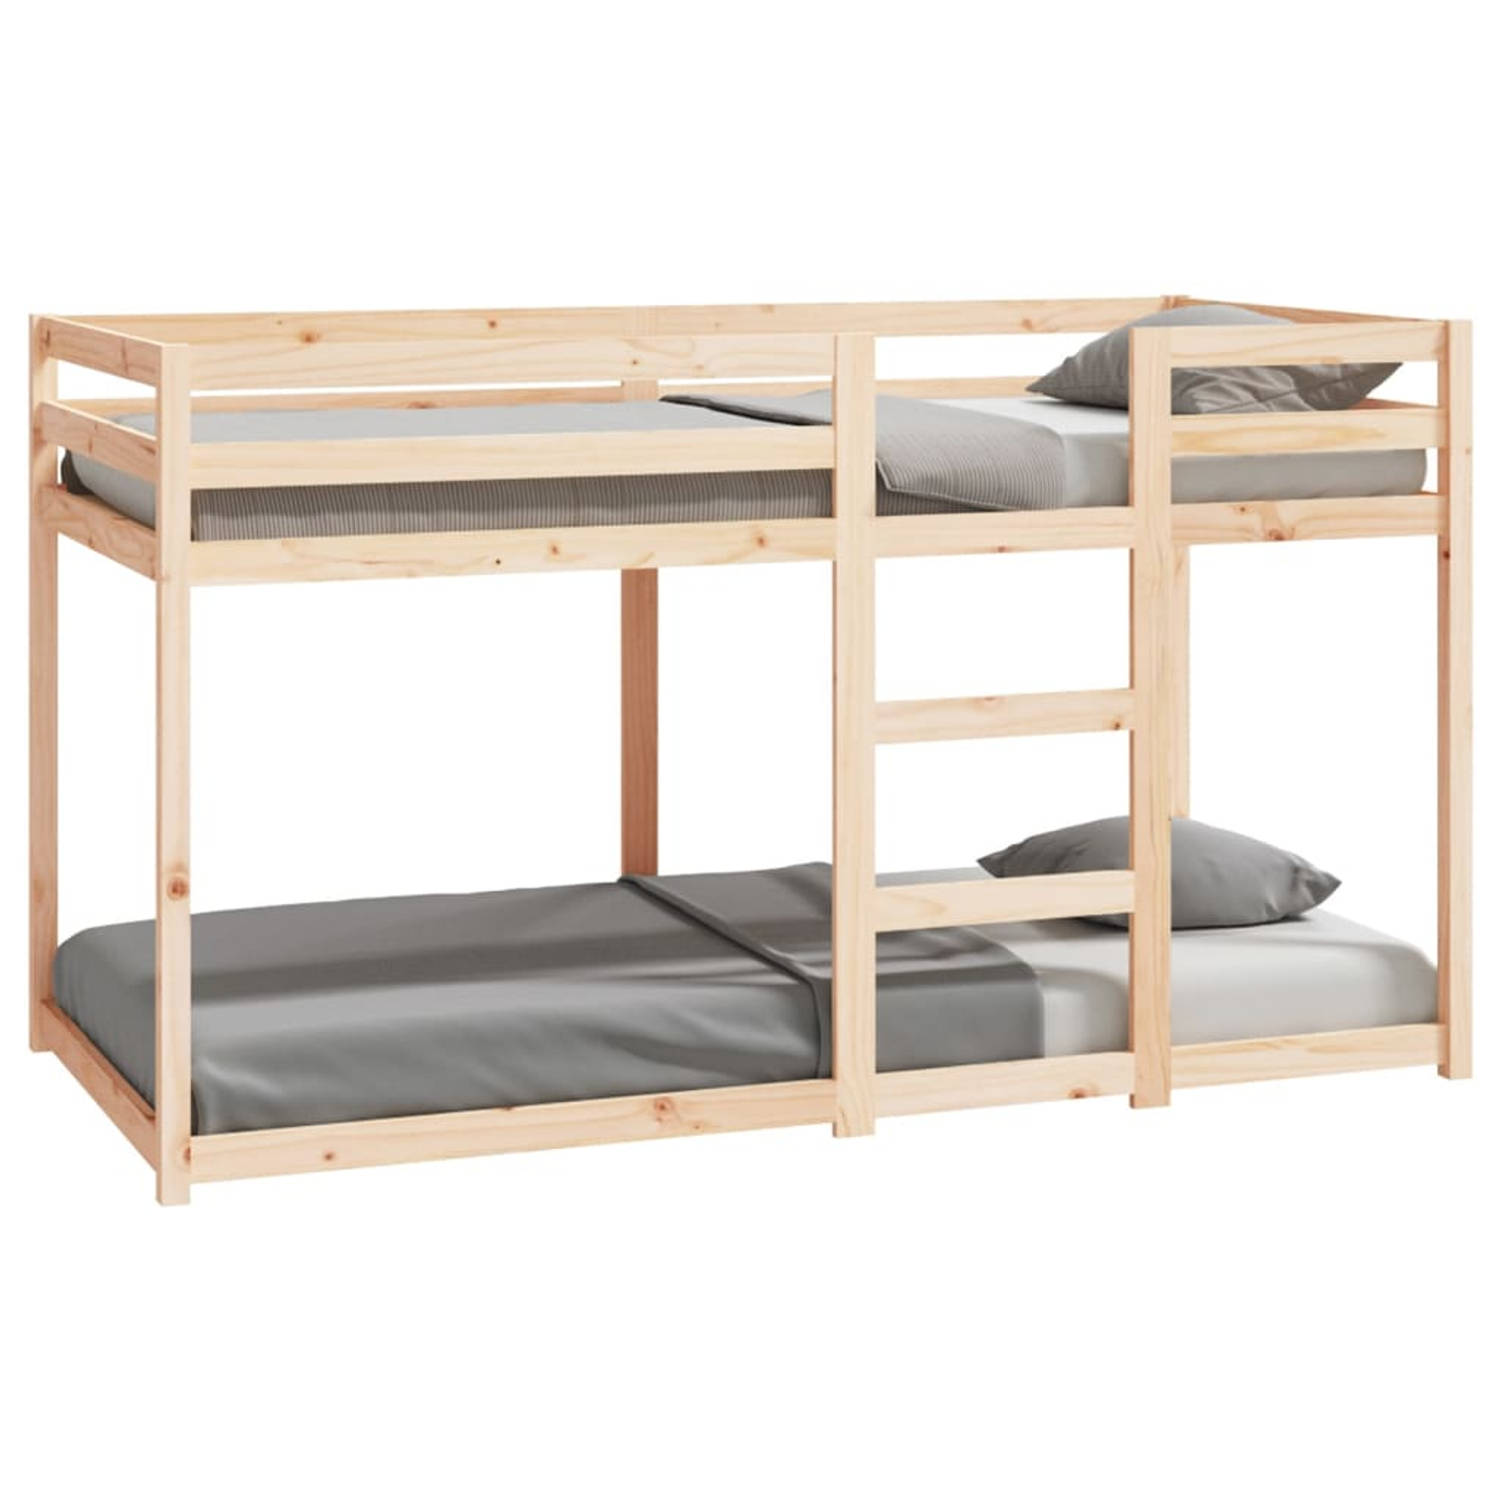 The Living Store Stapelbed massief grenenhout 90x190 cm - Stapelbed - Stapelbedden - Bed - Bedframe - Stapelbedframe - Bed Frame - Bedden - Bedframes - Stapelbedframes - Bed Frames